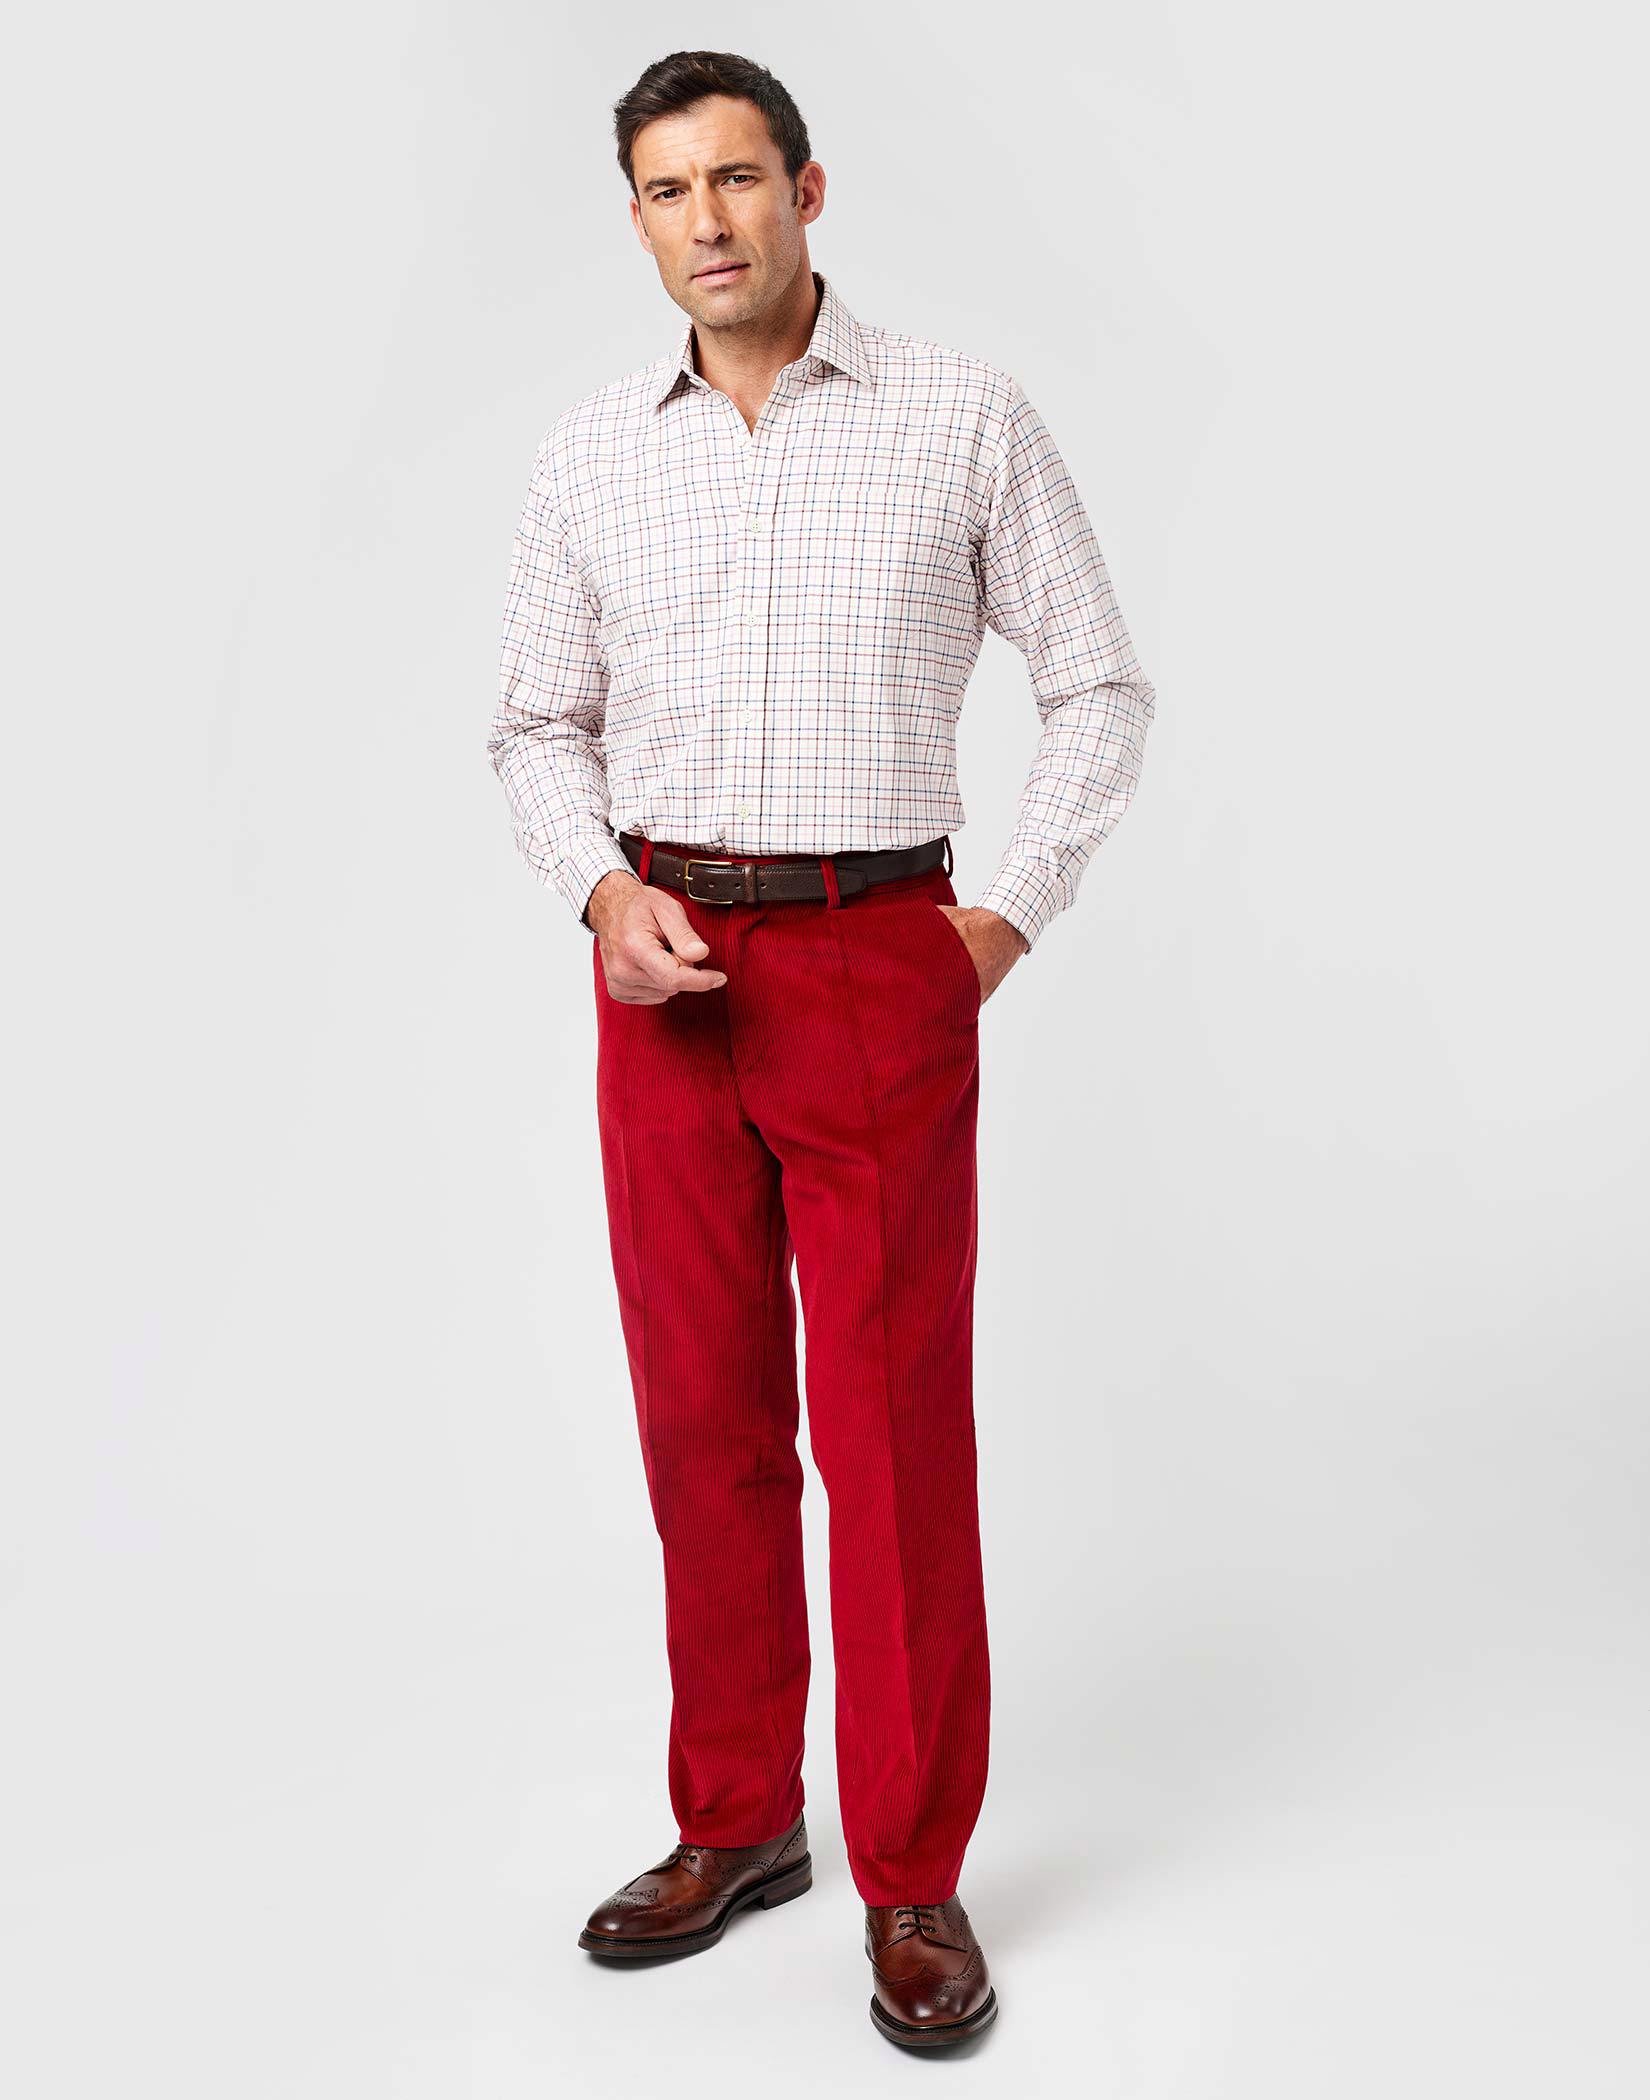 Country Life magazine wants to reclaim red trousers for posh people  The  Independent  The Independent